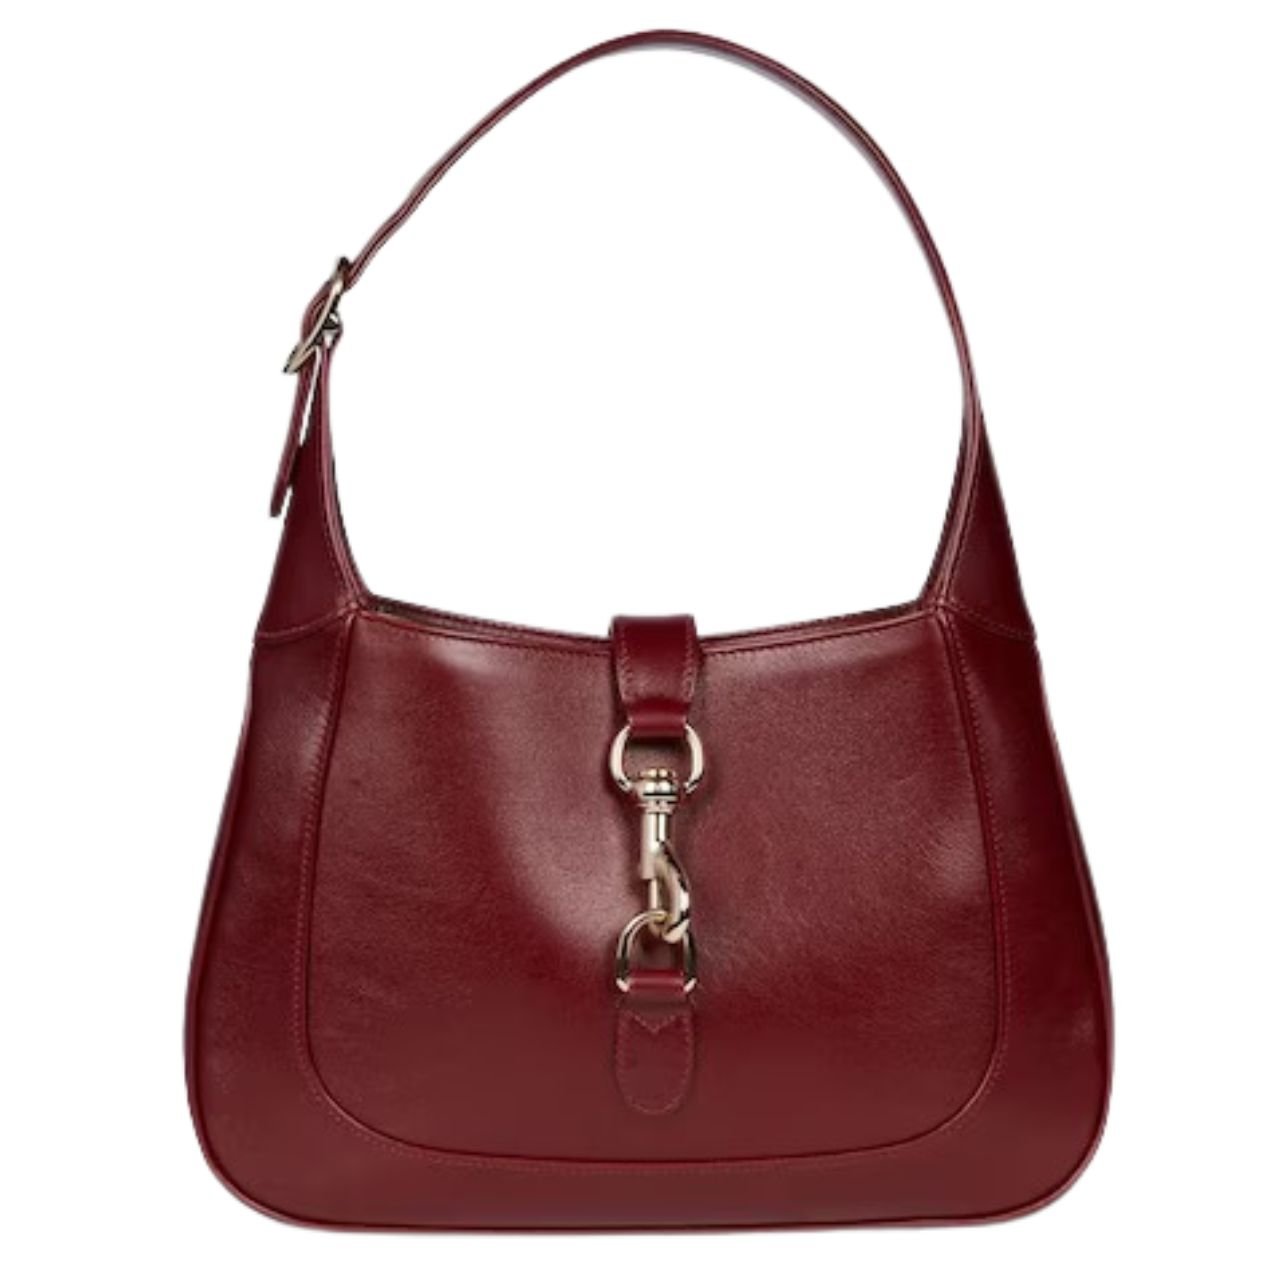 Gucci Jackie small shoulder bag in deep red leather